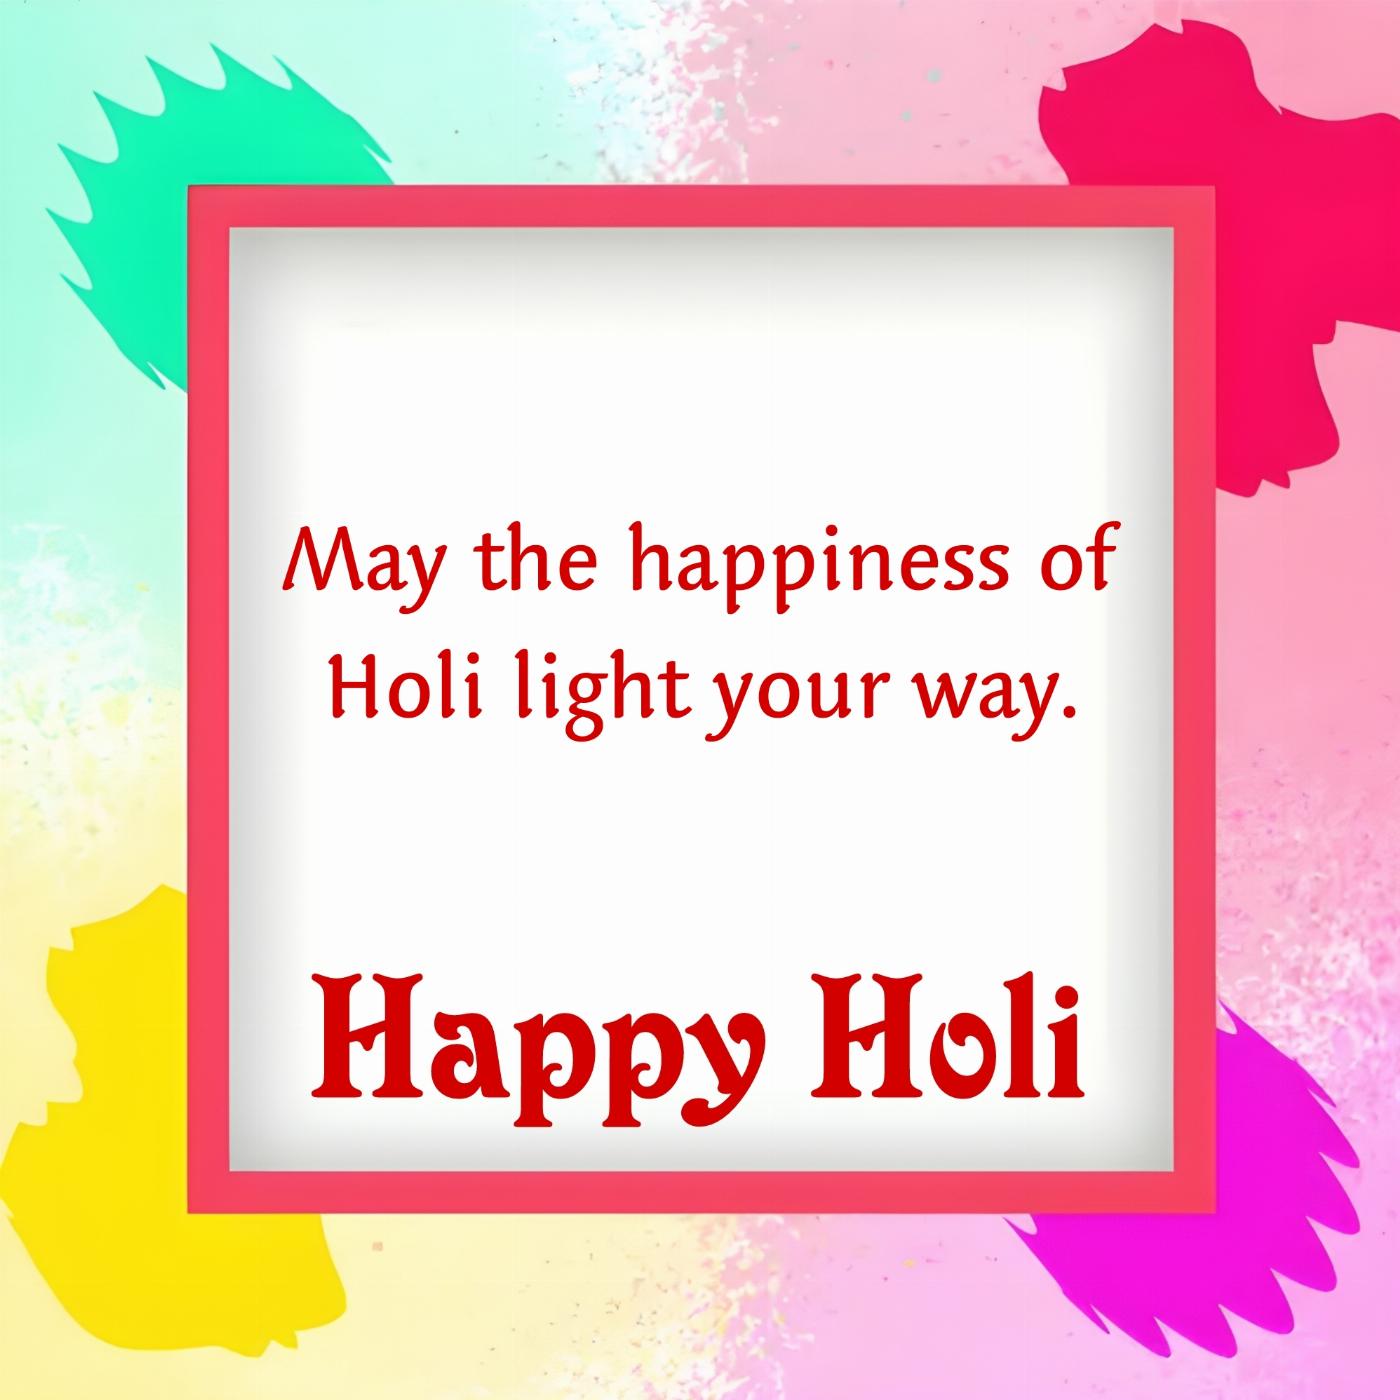 May the happiness of Holi light your way